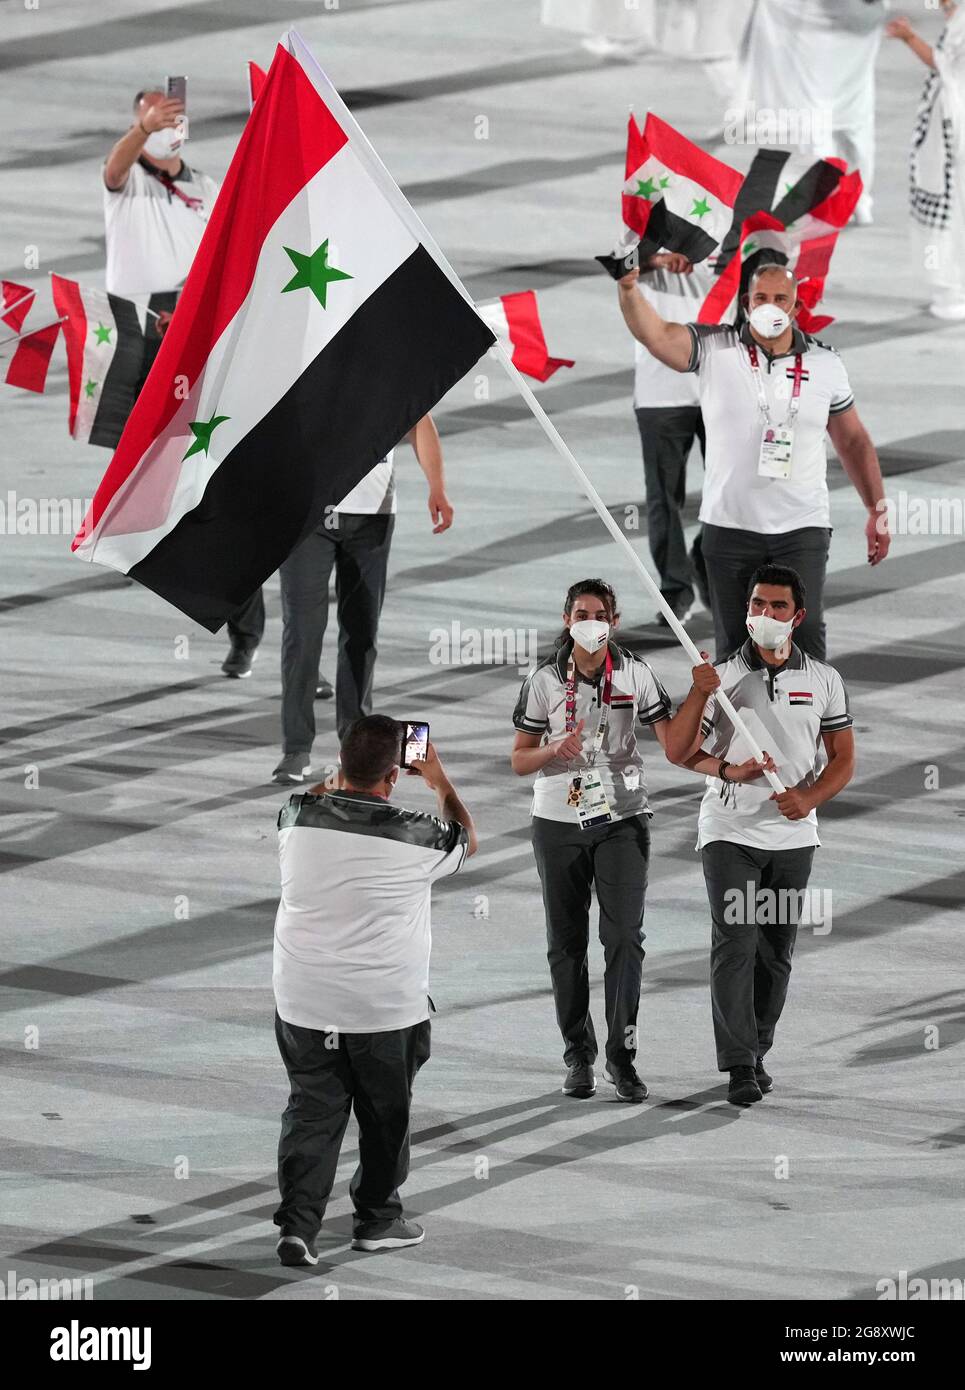 Syrian Arab Republic flagbearers Hend Zaza and Ahmad Saber Hamcho lead out the team during the opening ceremony of the Tokyo 2020 Olympic Games at the Olympic Stadium in Japan. Picture date: Friday July 23, 2021. Stock Photo